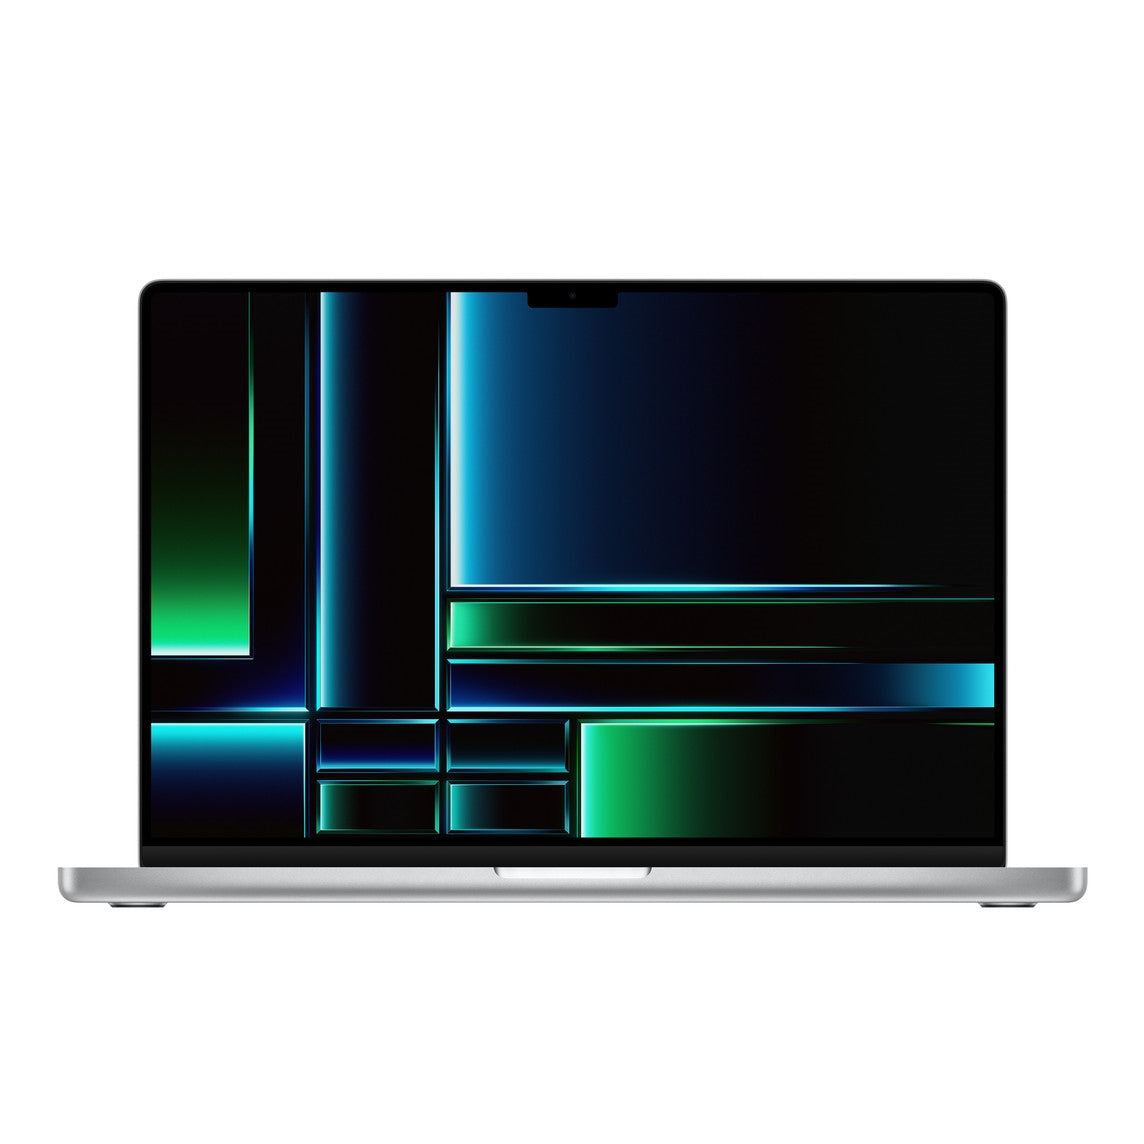 MNWD3AB/A /Apple 16-inch MacBook Pro: Apple M2 Pro chip with 12?core CPU and 19?core GPU, 1TB SSD - 1TB / SILVER / 19-core